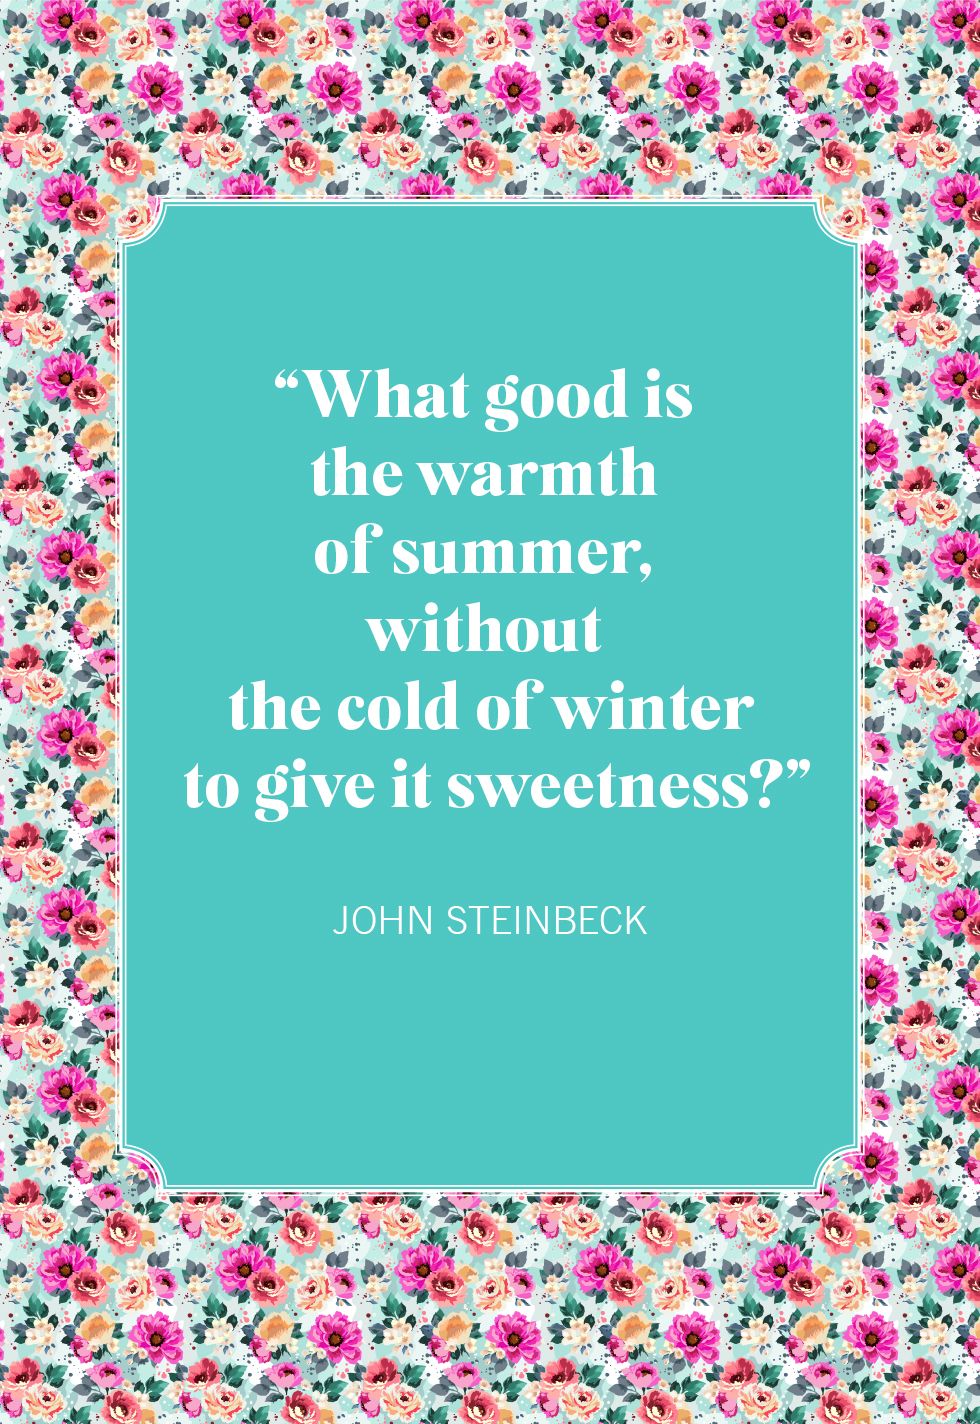 50 Best Summer Quotes - Short, Funny, and Cute Quotes About Summer